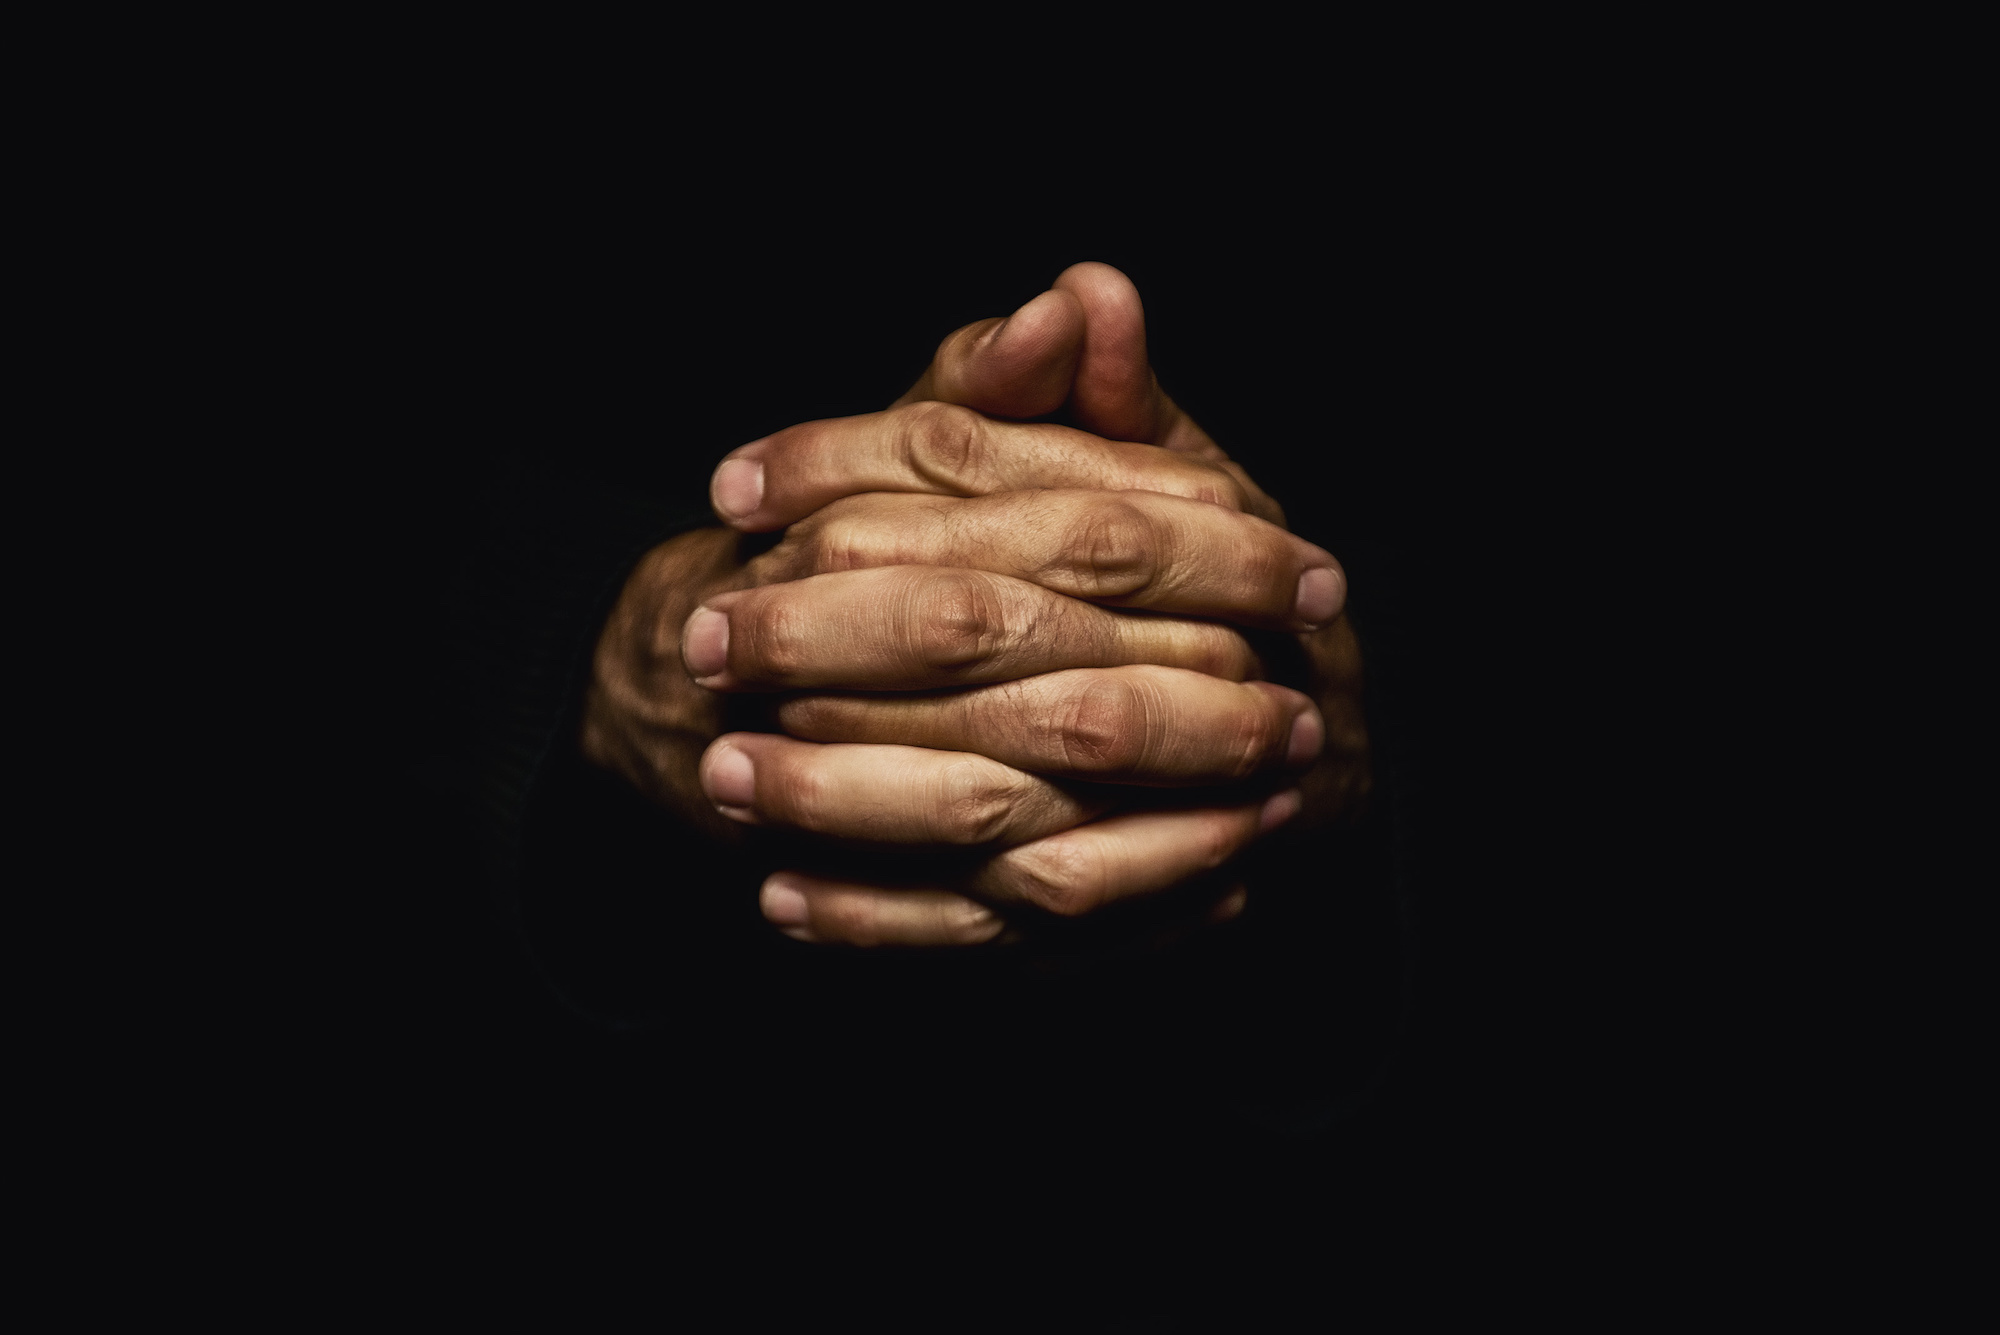 Image Praying Hands Black Background Pc Android iPhone And